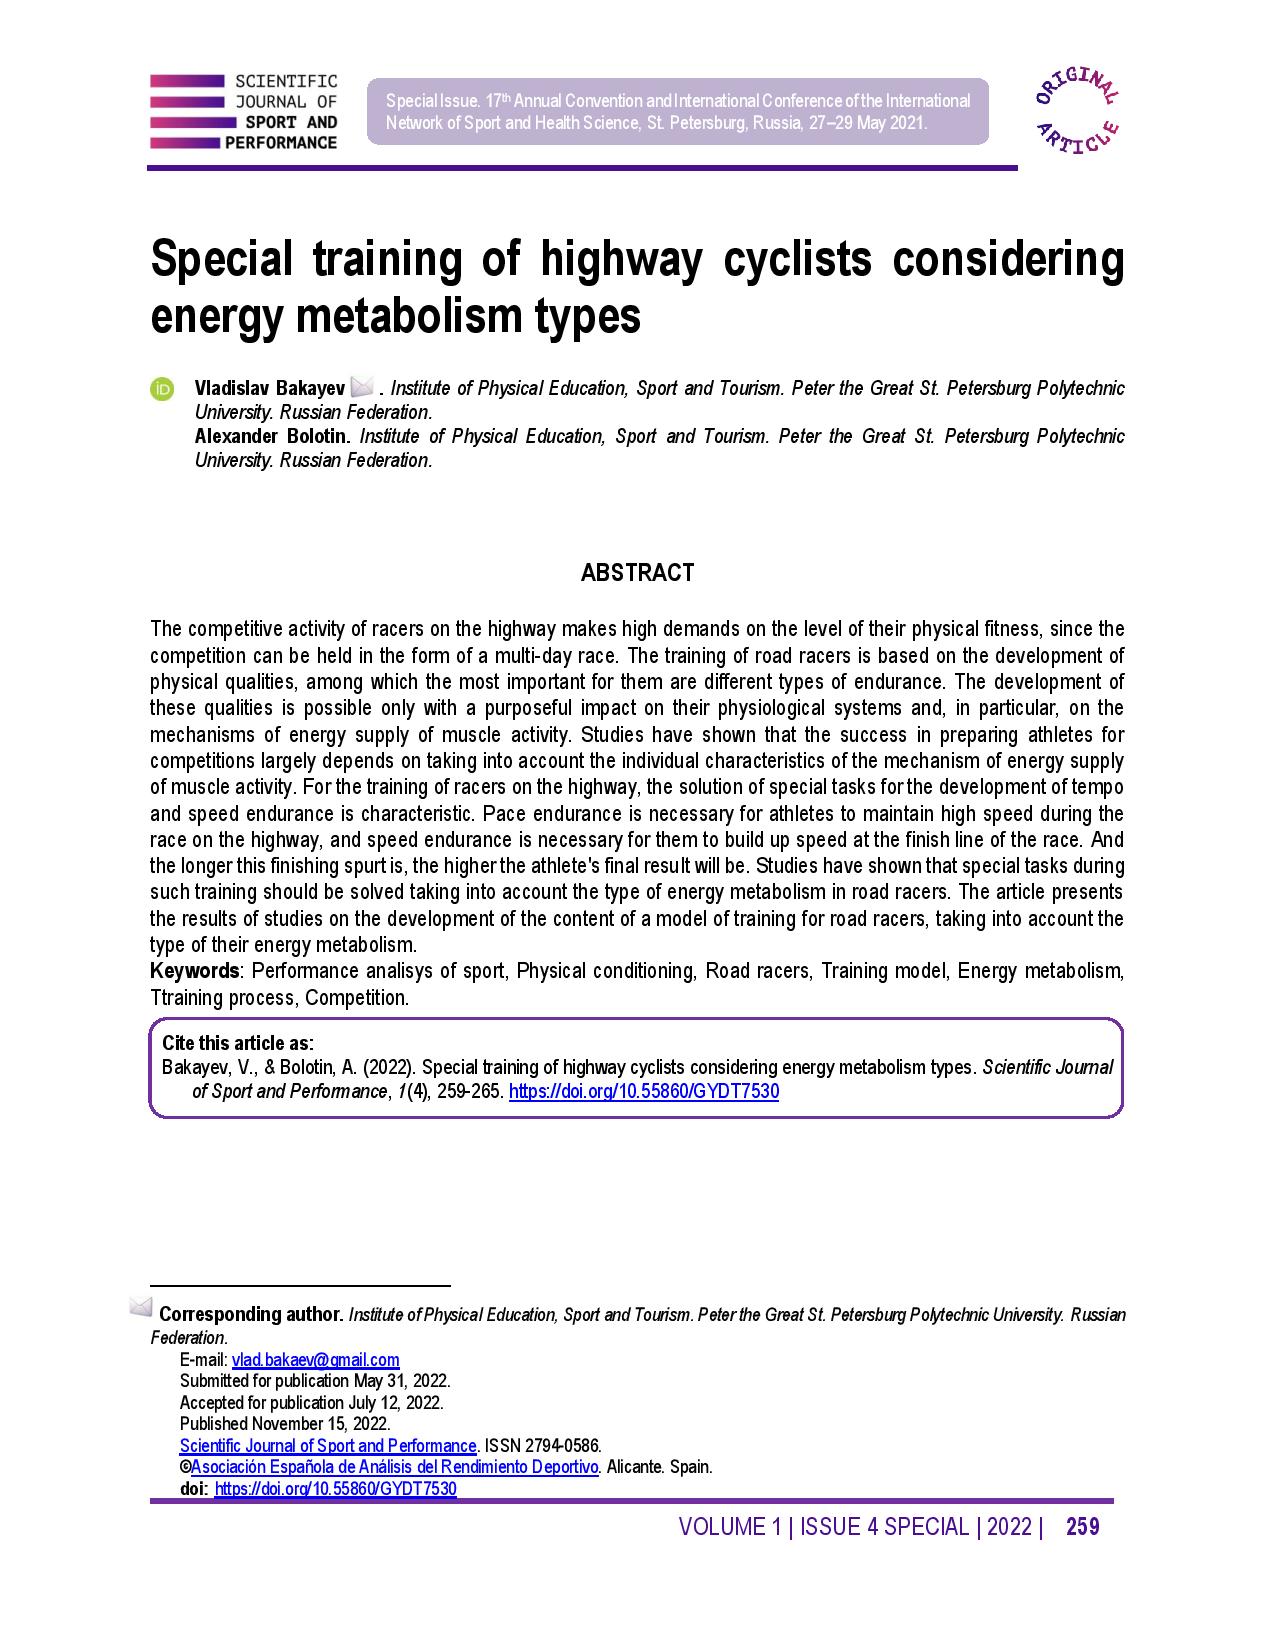 Special training of highway cyclists considering energy metabolism types